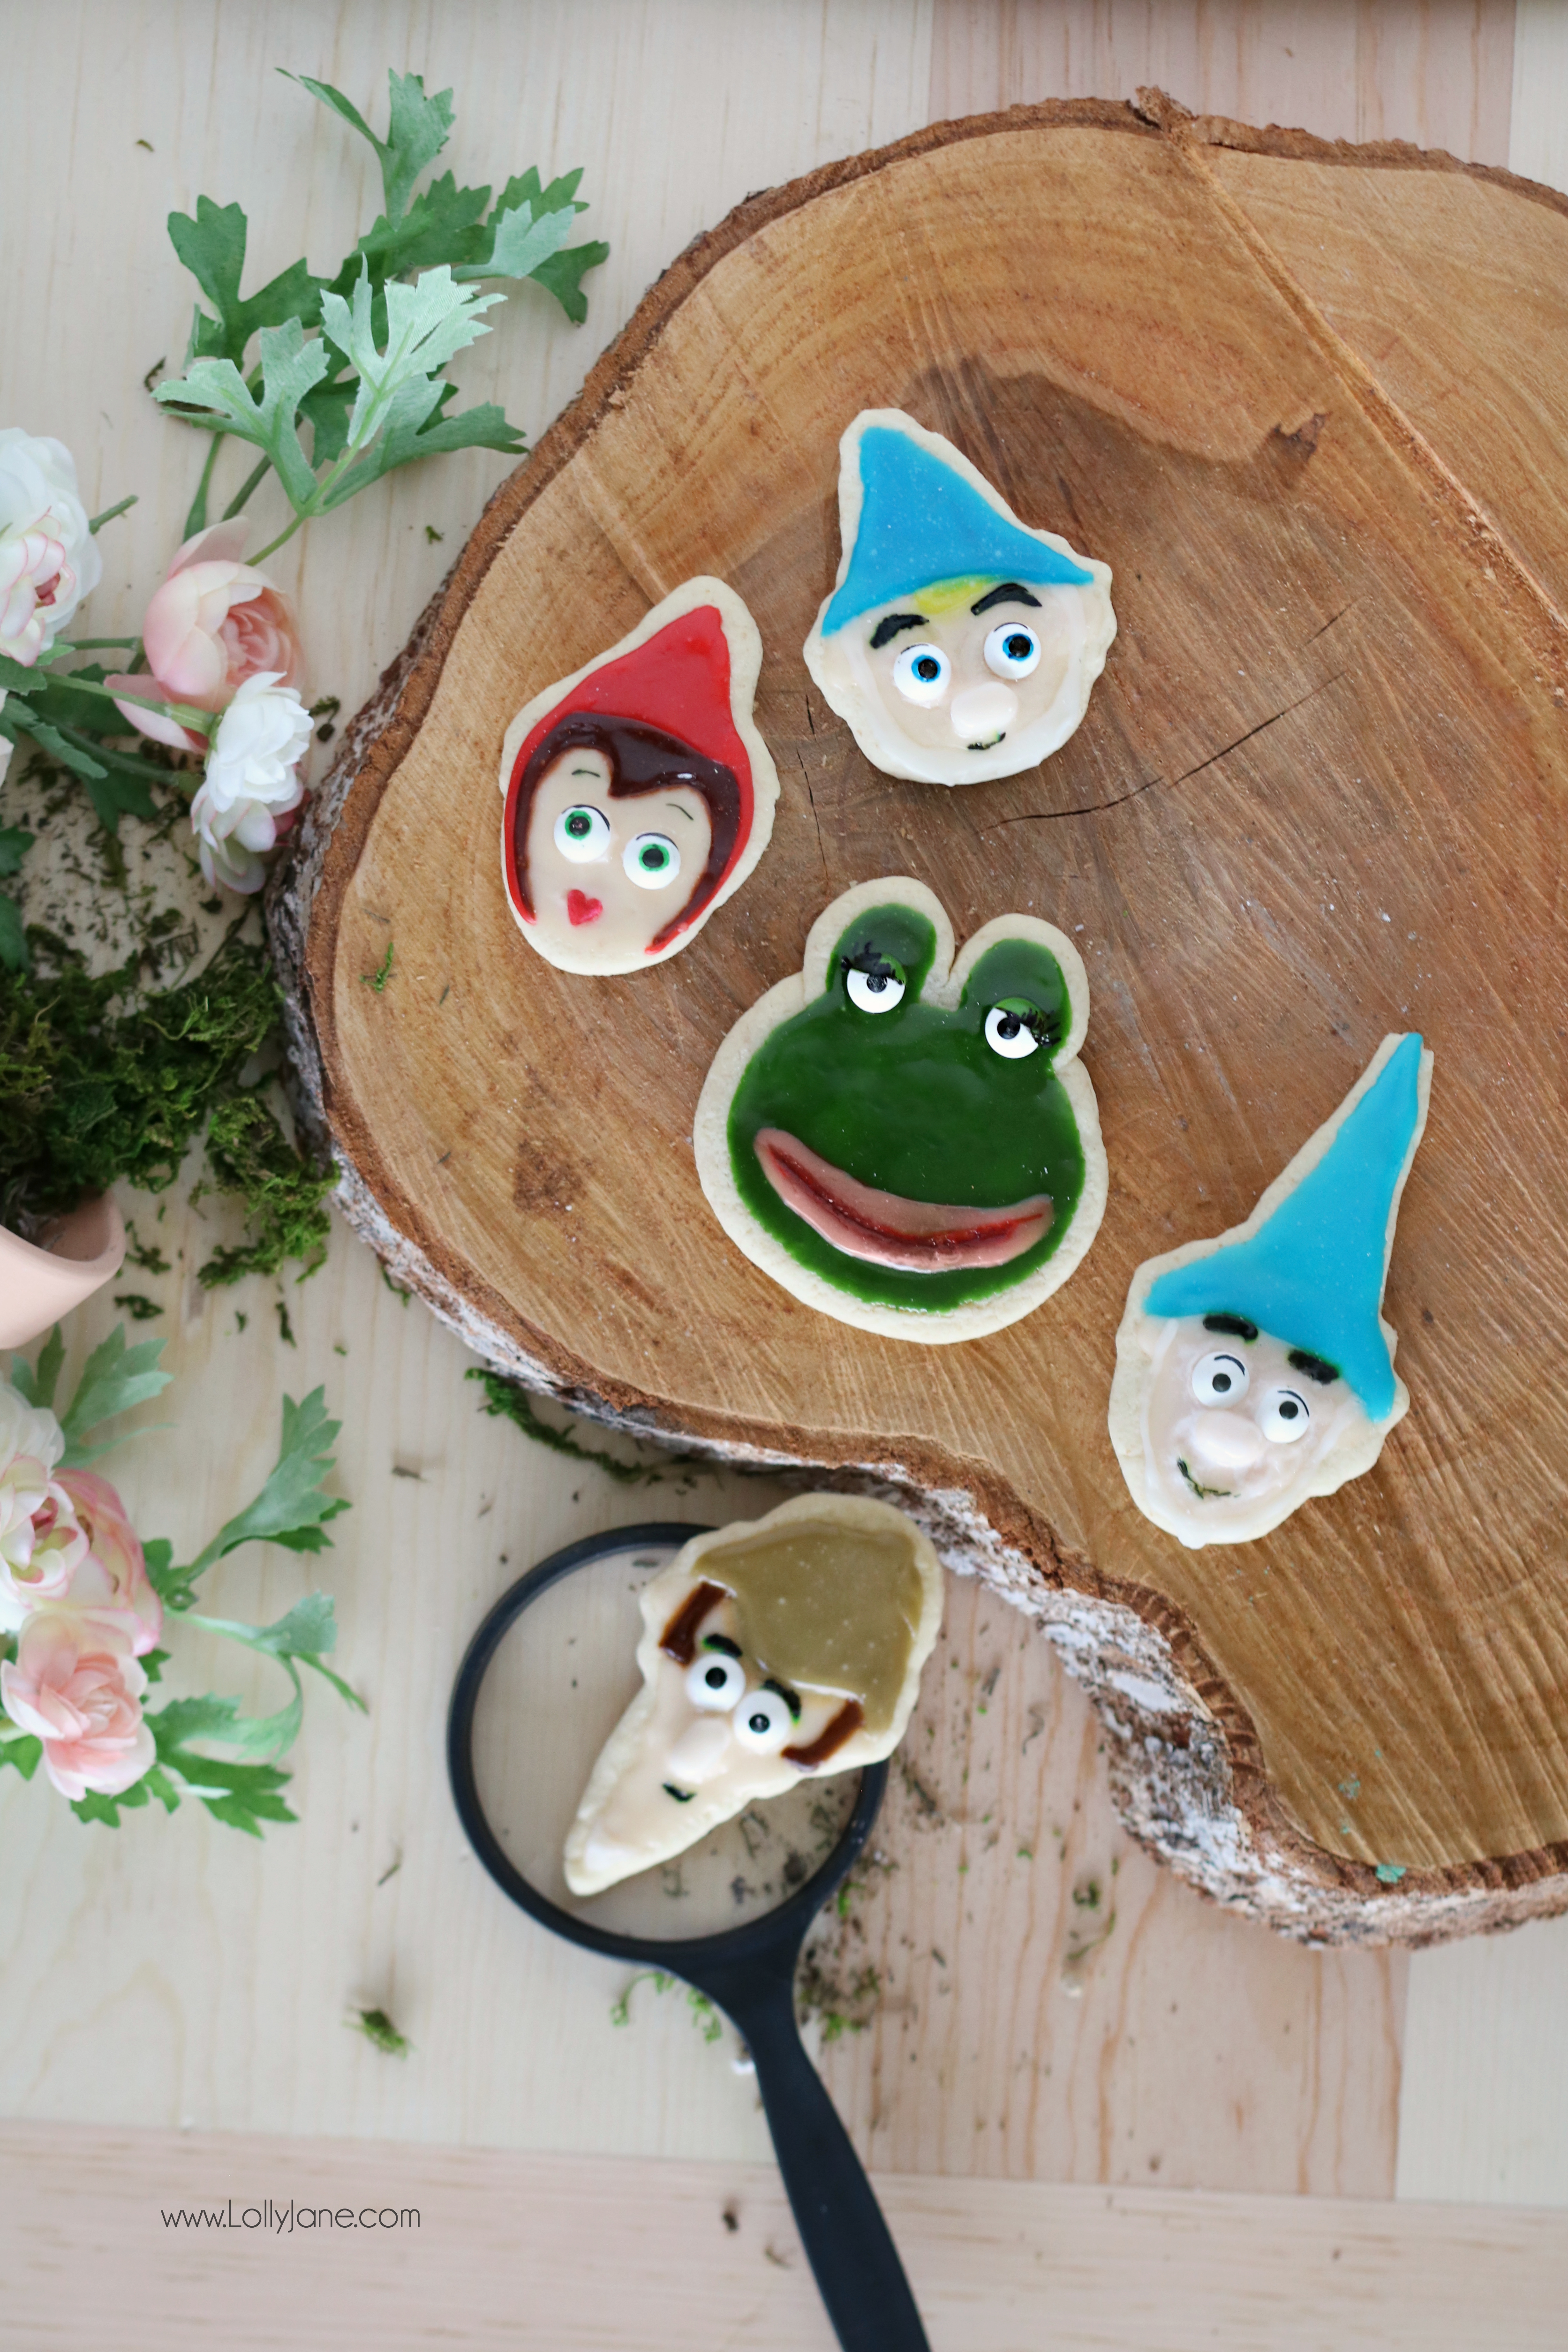 Yummy and cute Royal Icing Sugar Cookies, perfect for your Sherlock Gnomes parties or movie premier!